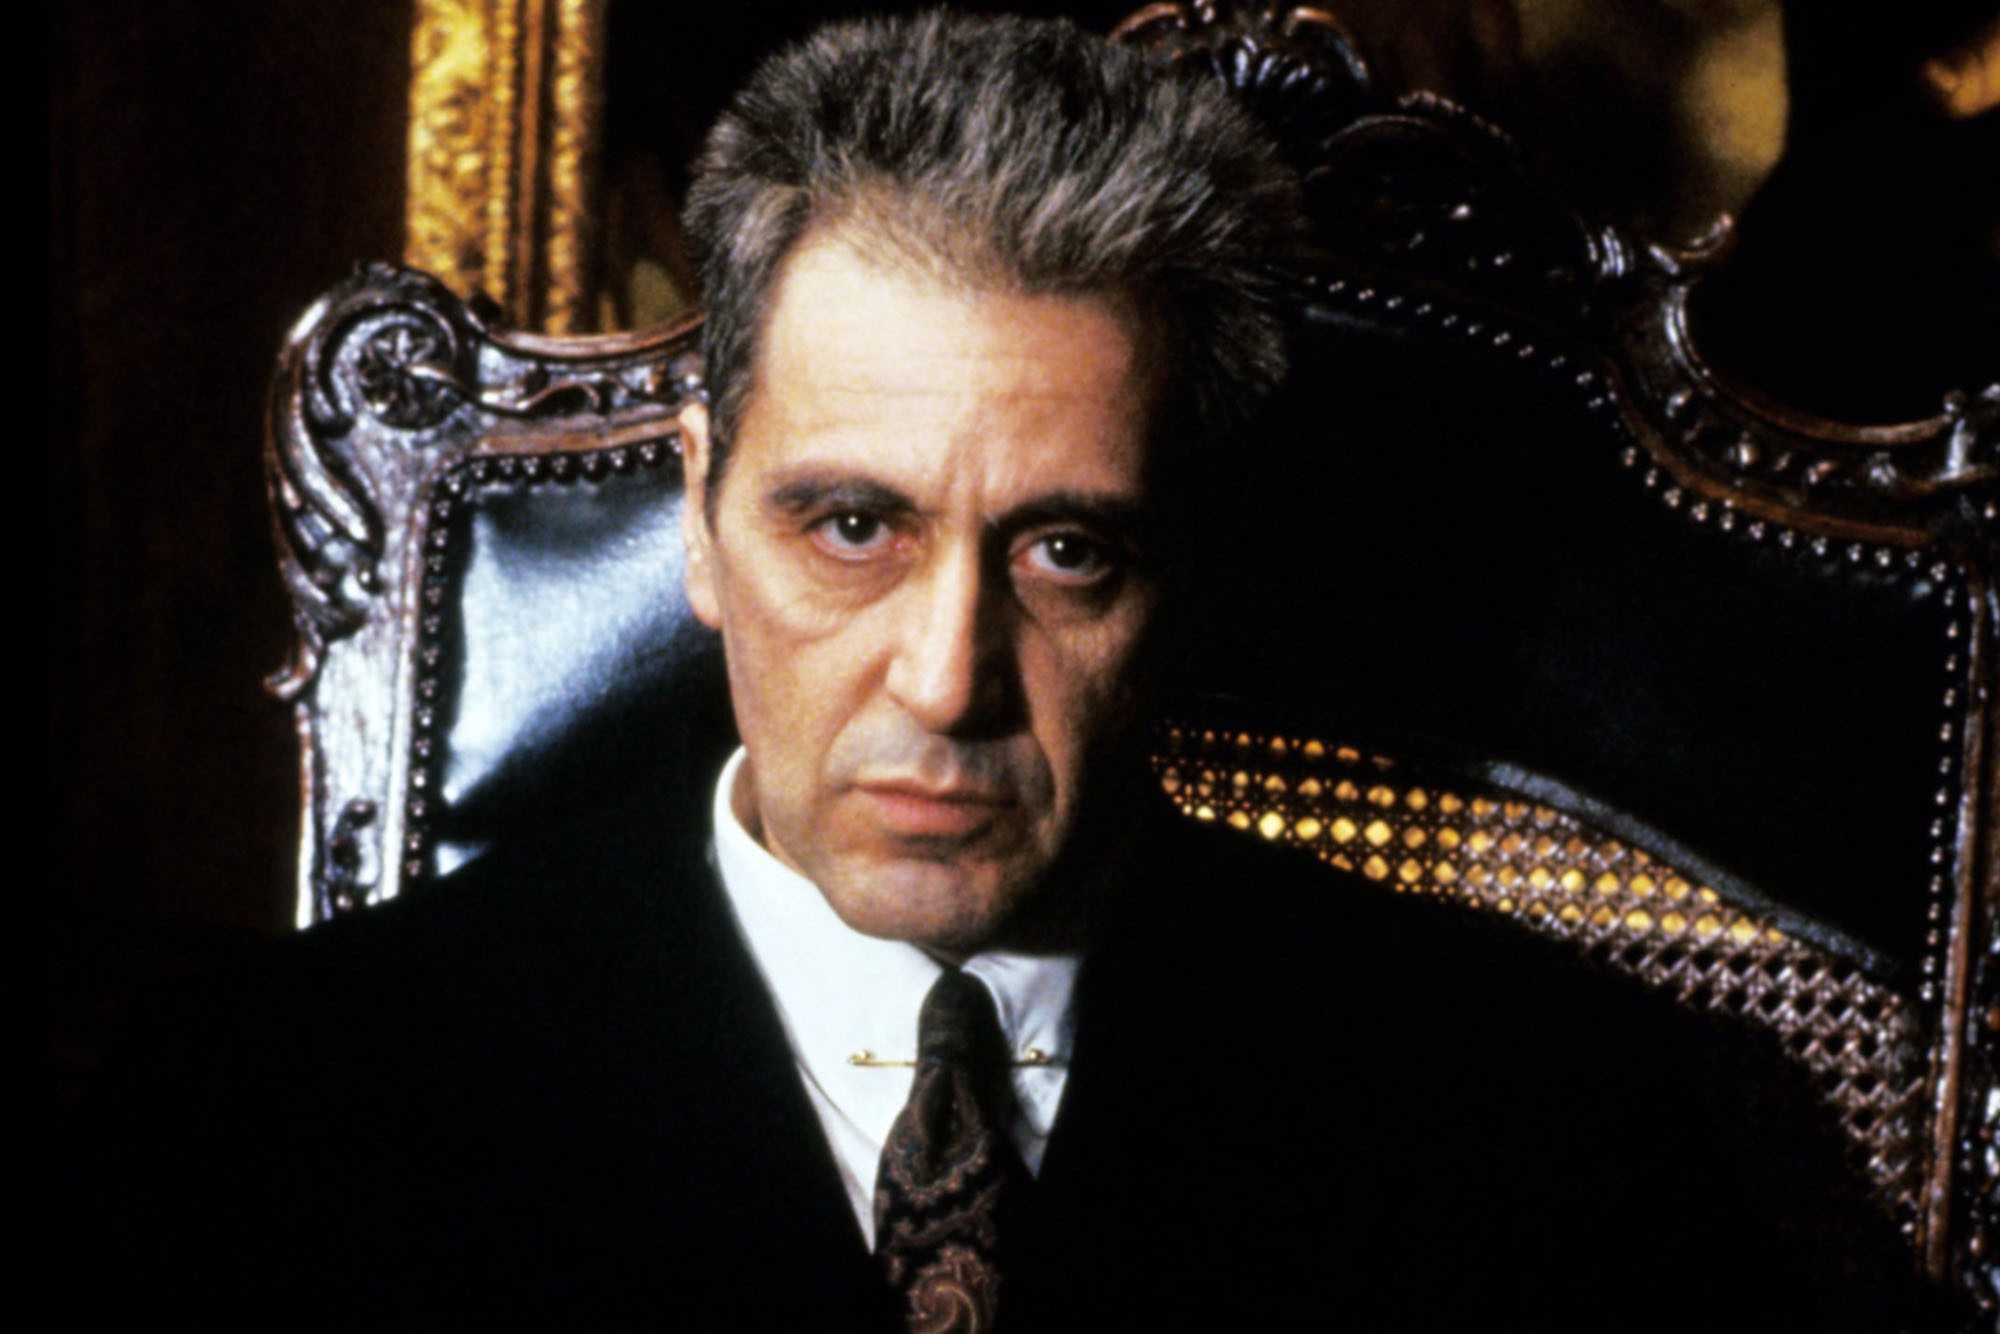 The Godfather Part III Getting A New Director’s Cut!